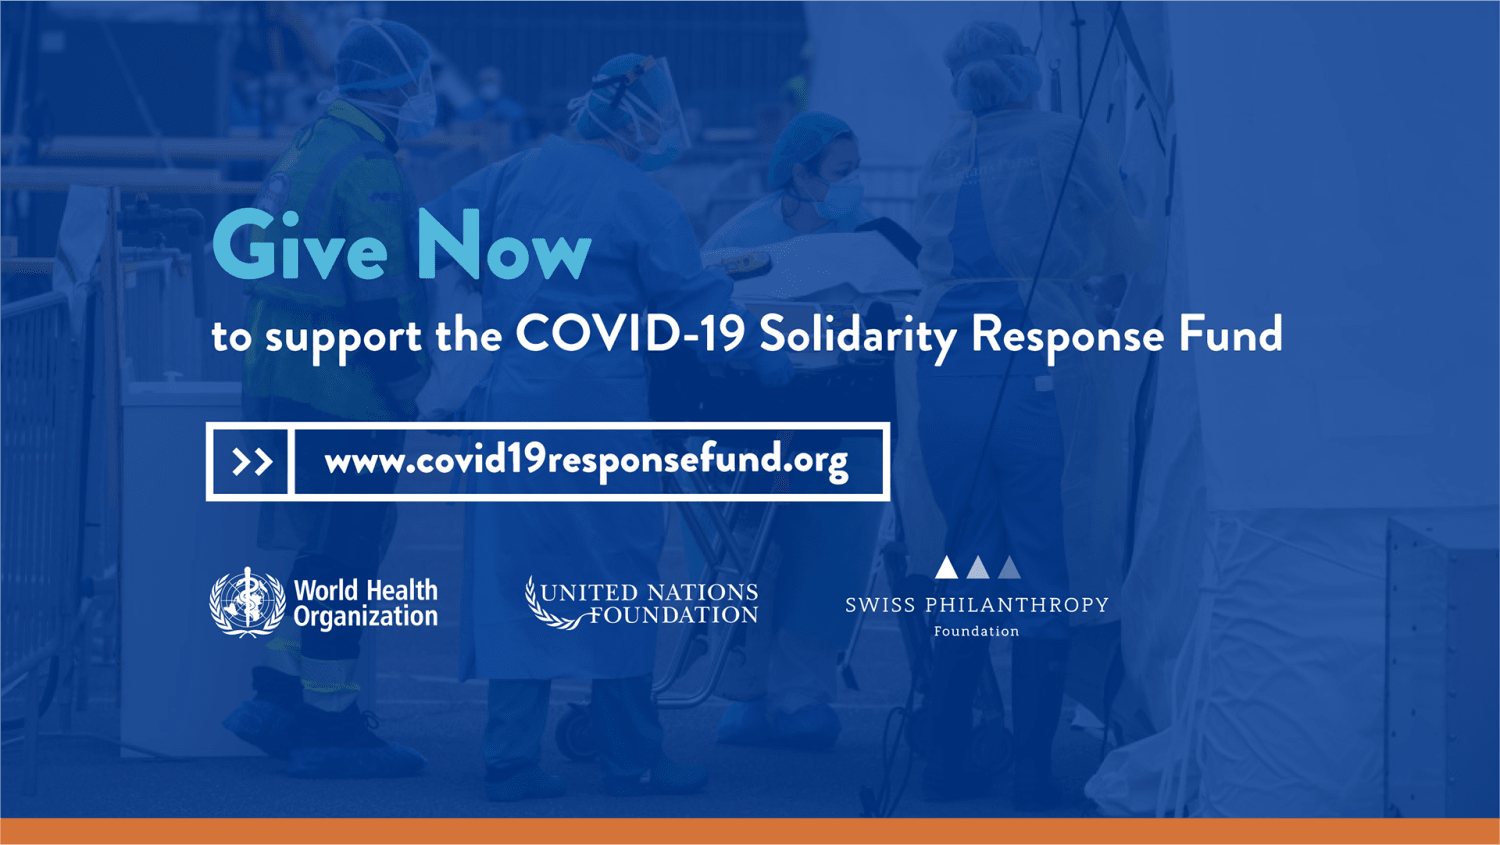 COVID-19 Solidarity Response Fund for WHO